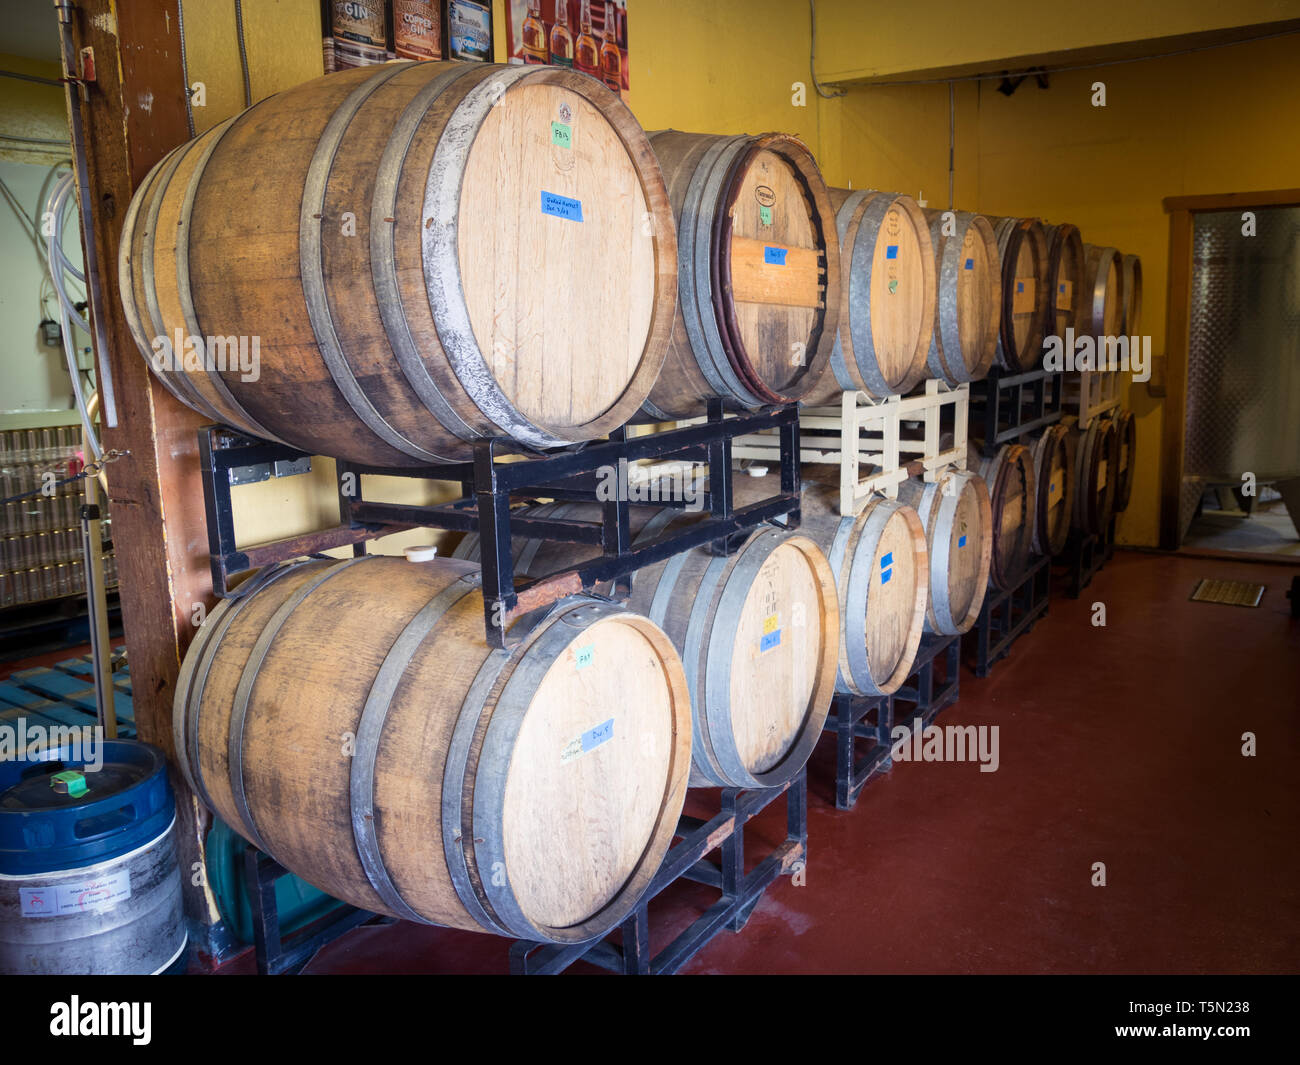 Distilled spirits in oak barrels at the Merridale Cidery and Distillery in Cobble Hill, Cowichan Valley, British Columbia, Canada. Stock Photo